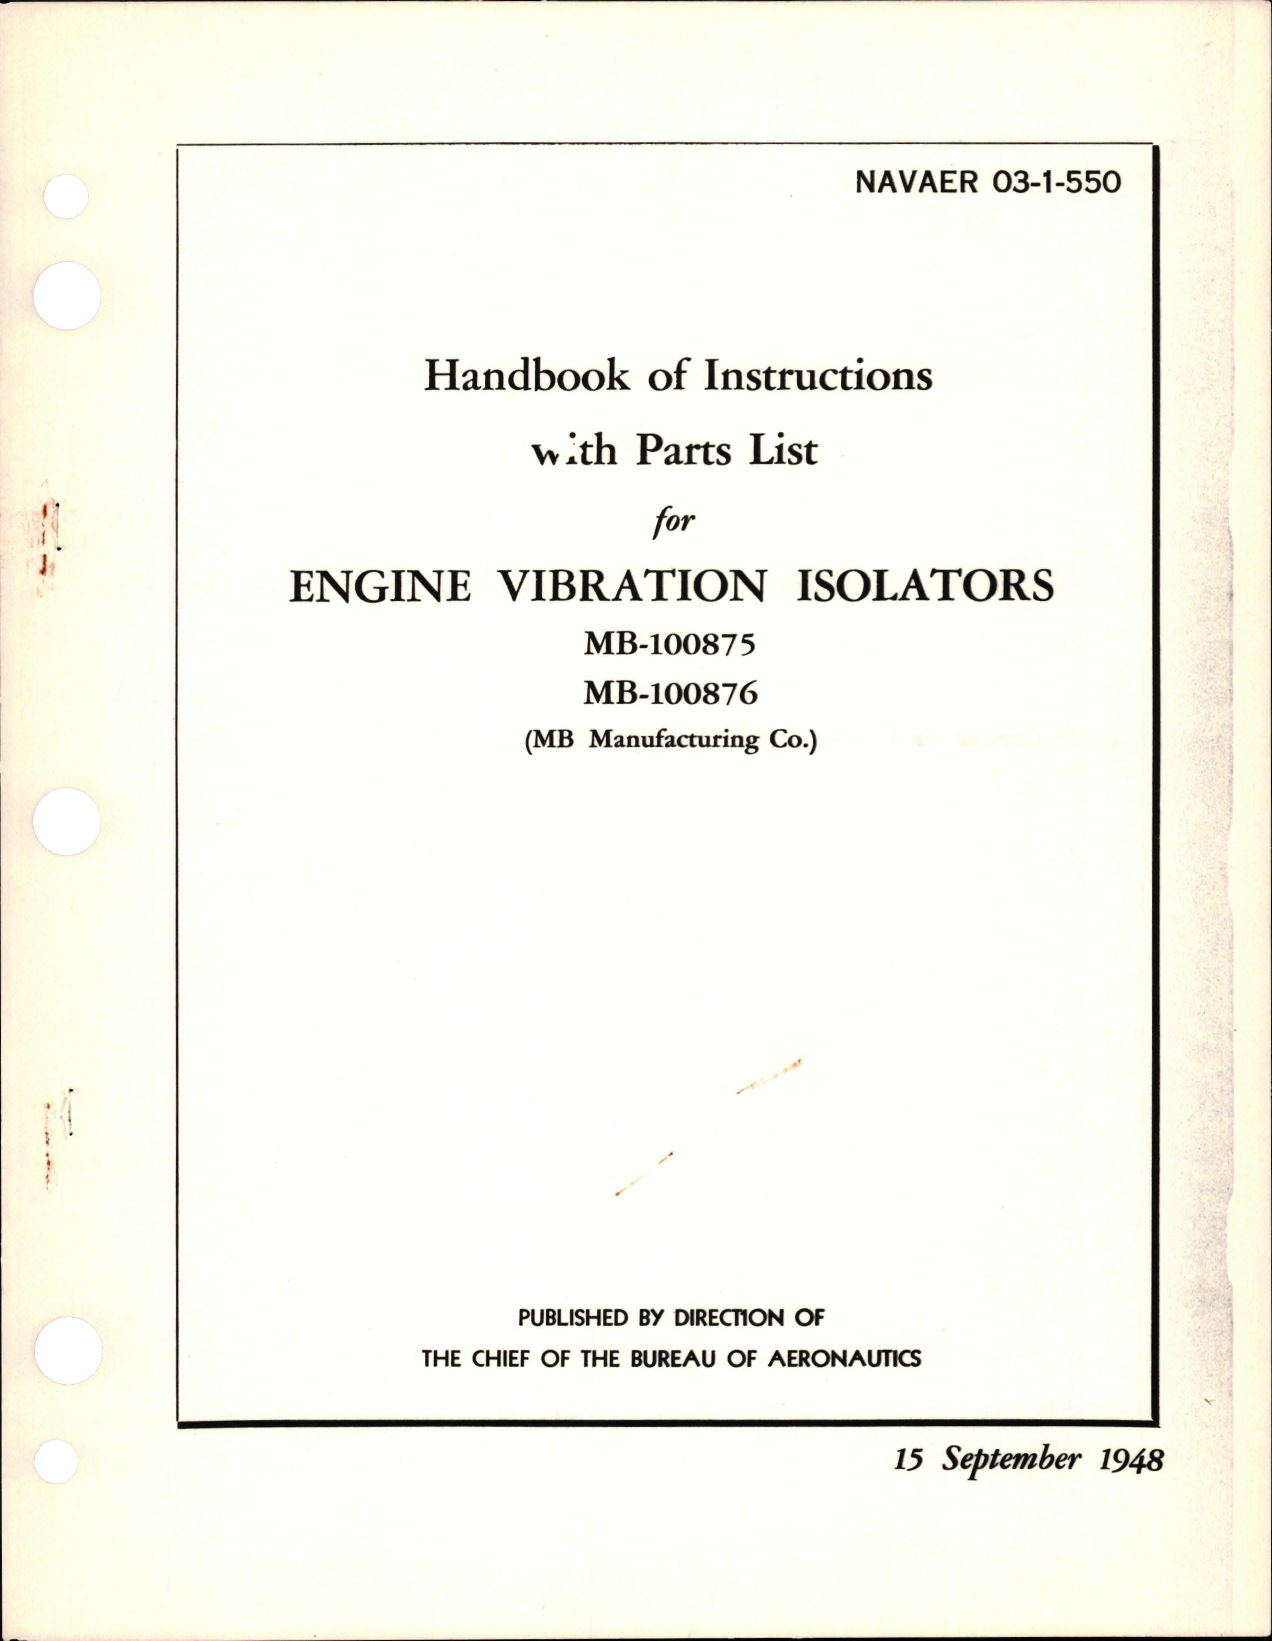 Sample page 1 from AirCorps Library document: Instructions with Parts List for Engine Vibration Isolators - MB-100875 and MB-100876